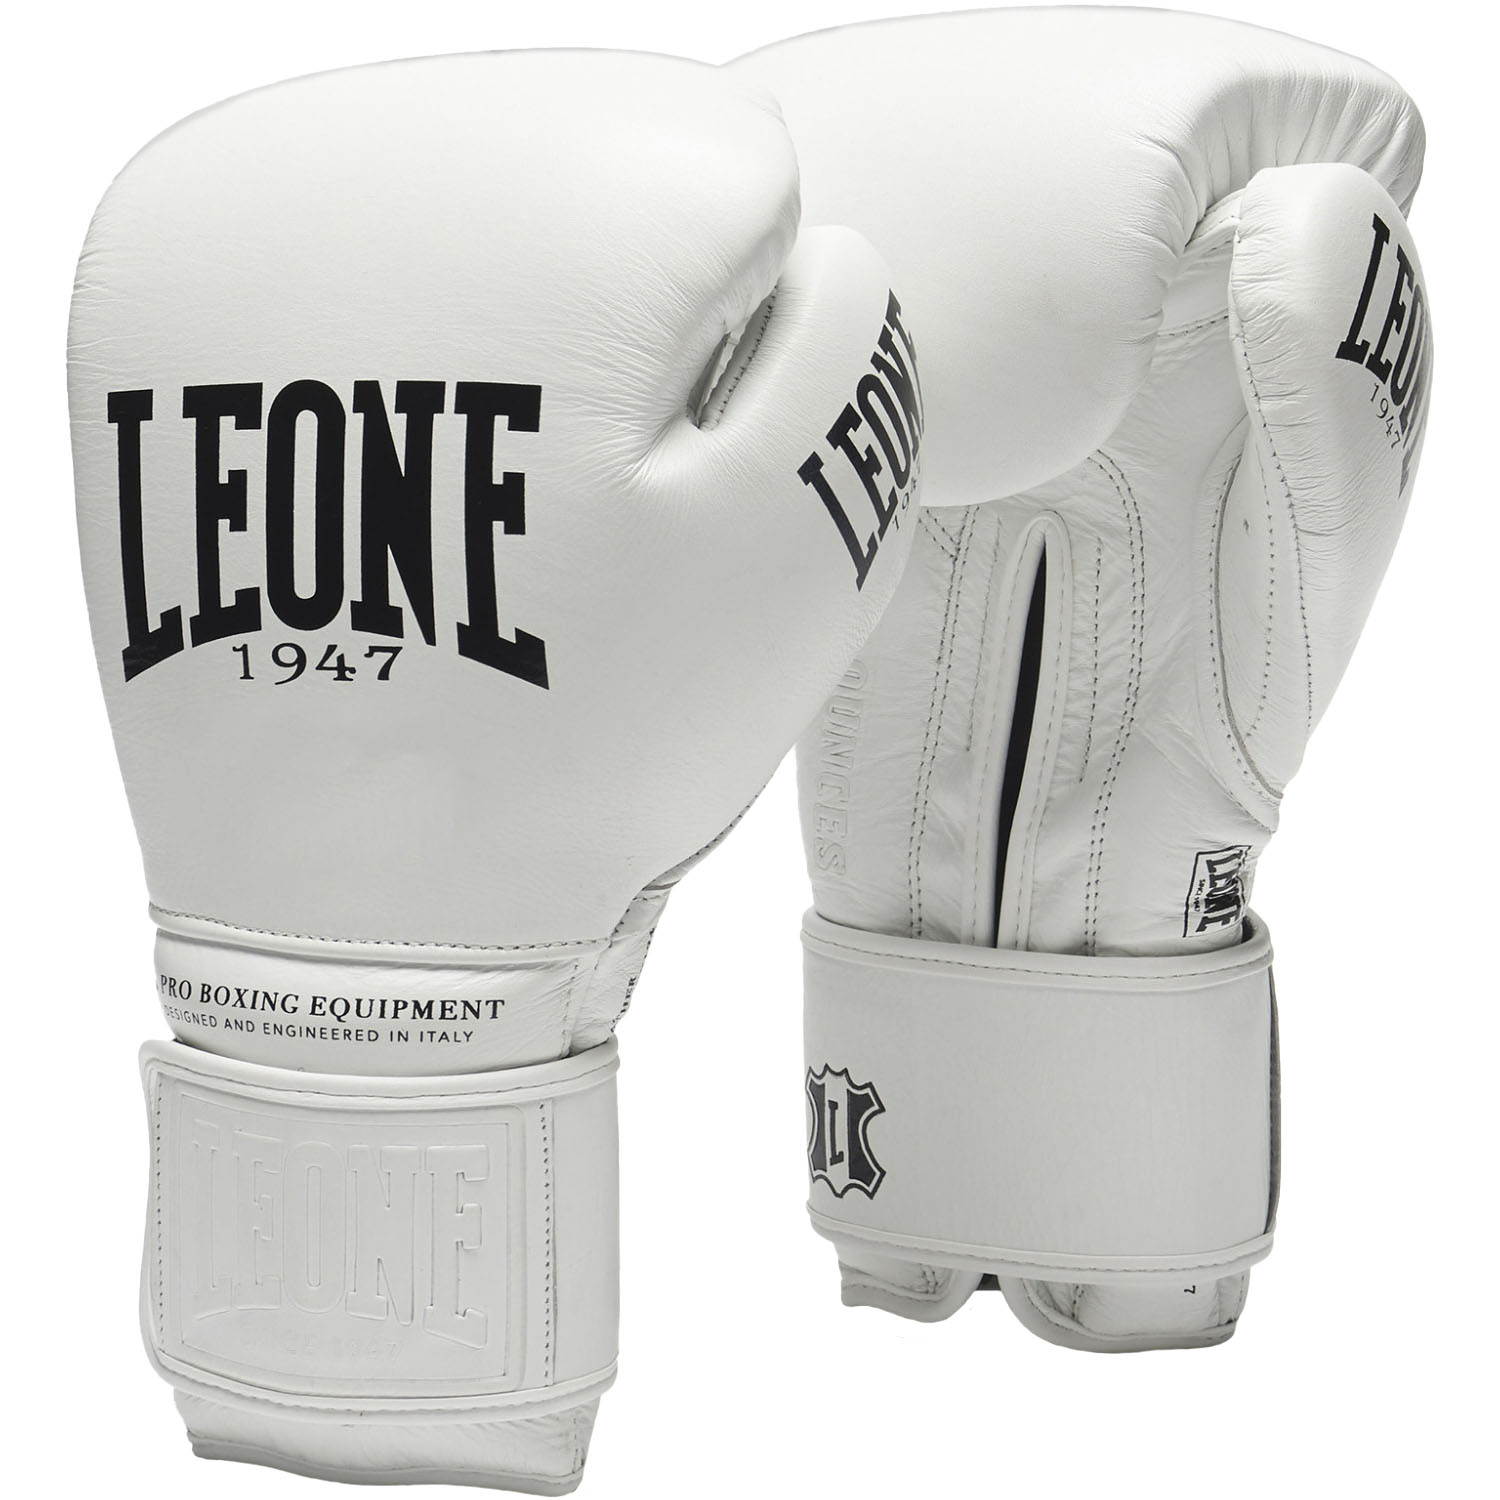 LEONE Boxhandschuhe, The Greatest, GN111, weiß, 14 Oz